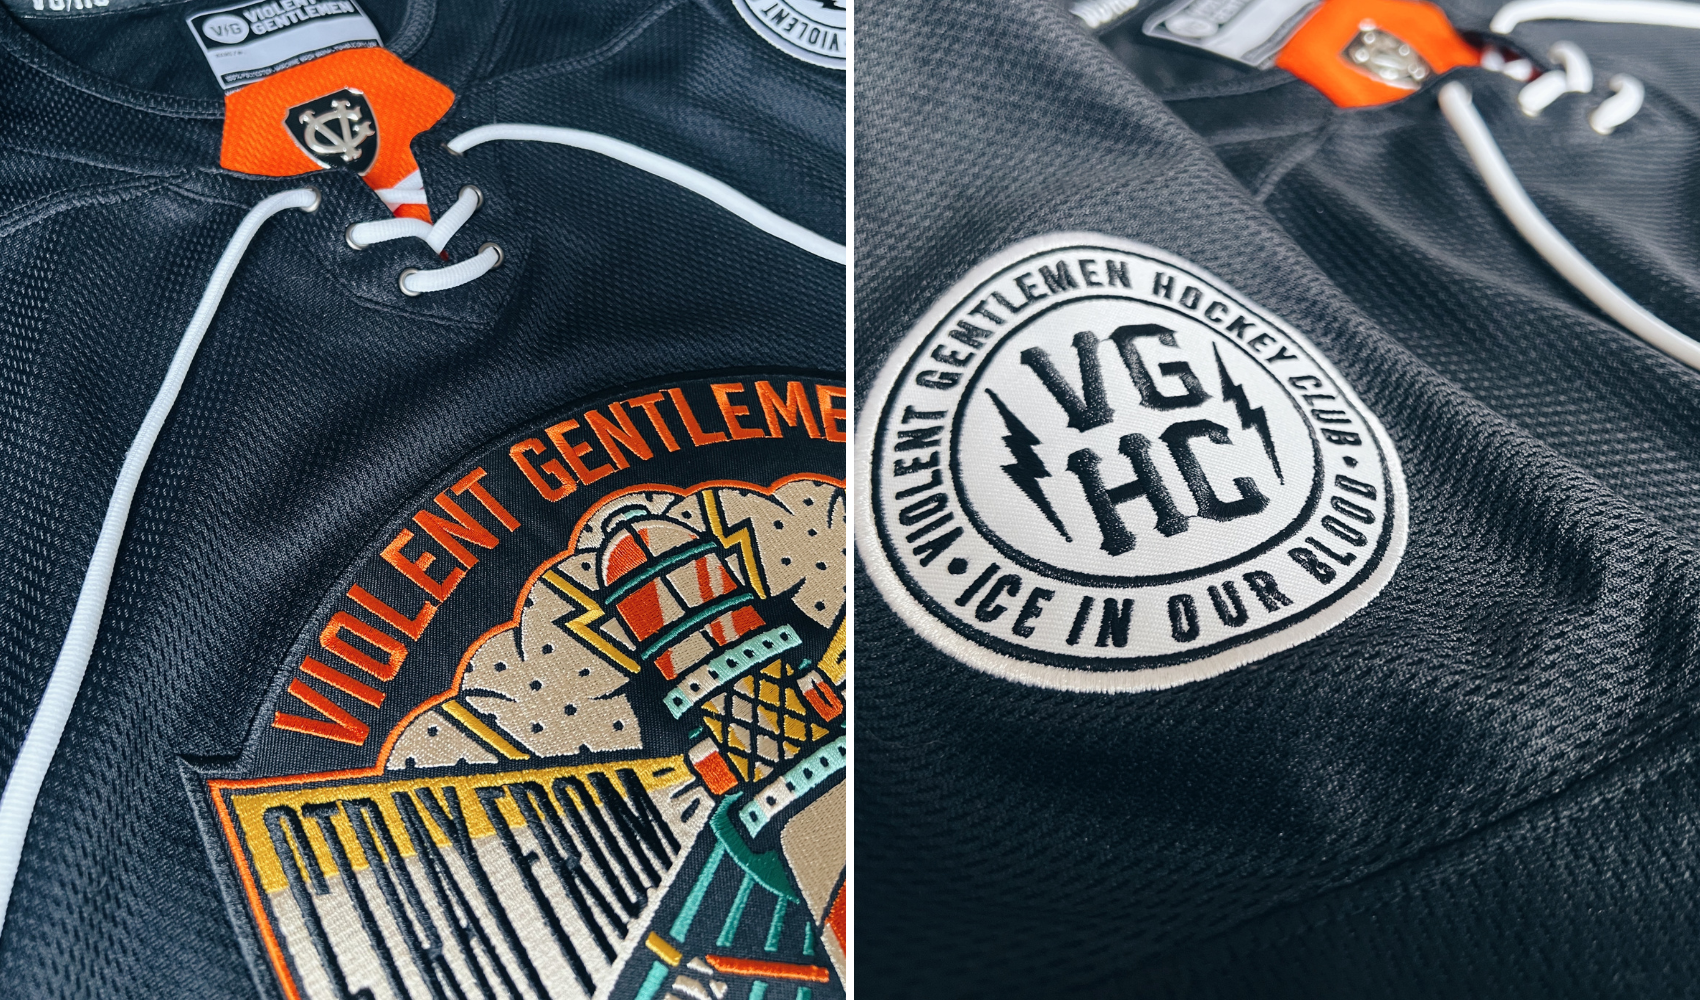 Lifetipsforbetterliving Hockey Clothing Company Hockey Club  new releases available now - new collaboration with music group Stray From The Path - perfect for any hockey player off the ice